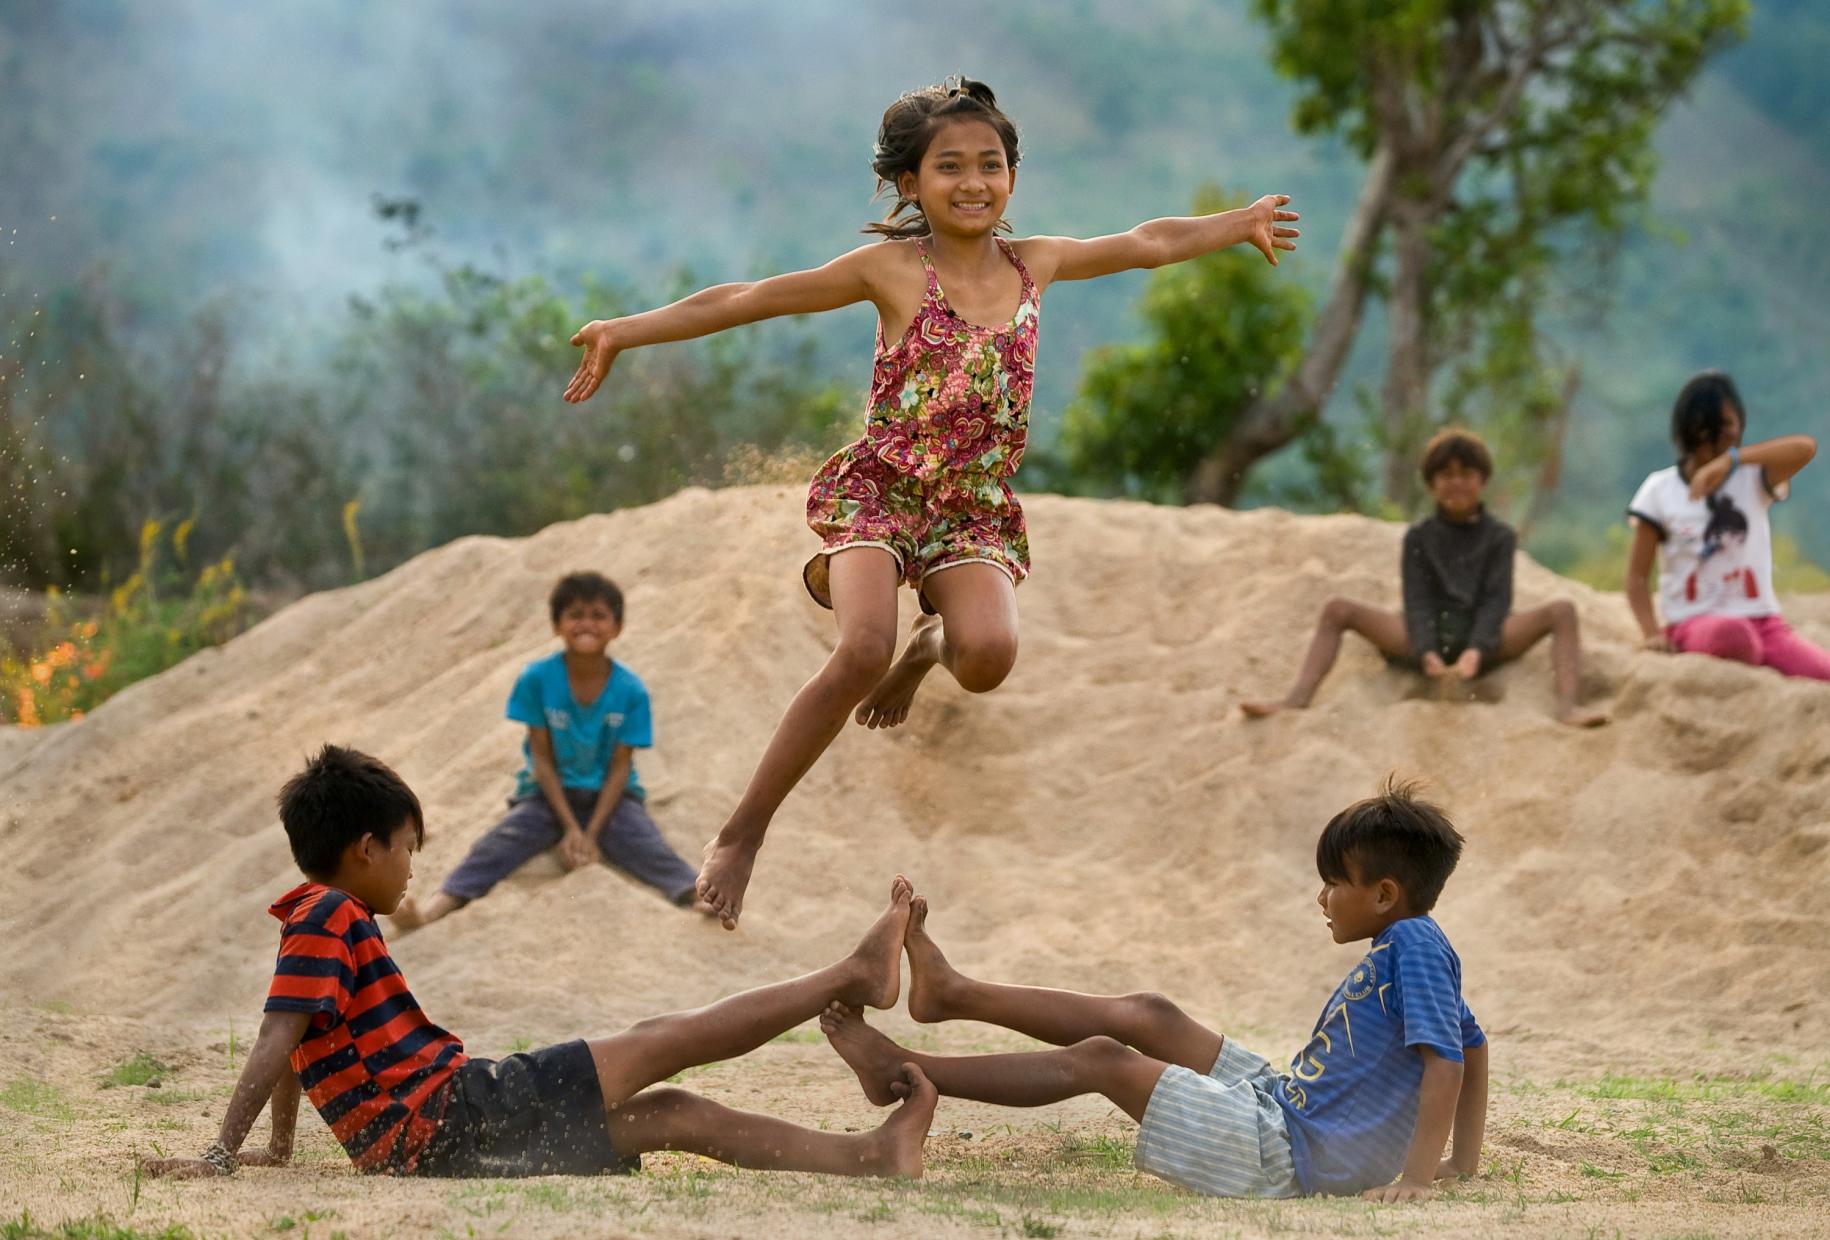 Children play outside. Two boys are on the ground touching their feet, while one girl is frozen in the air happily jumping above them.